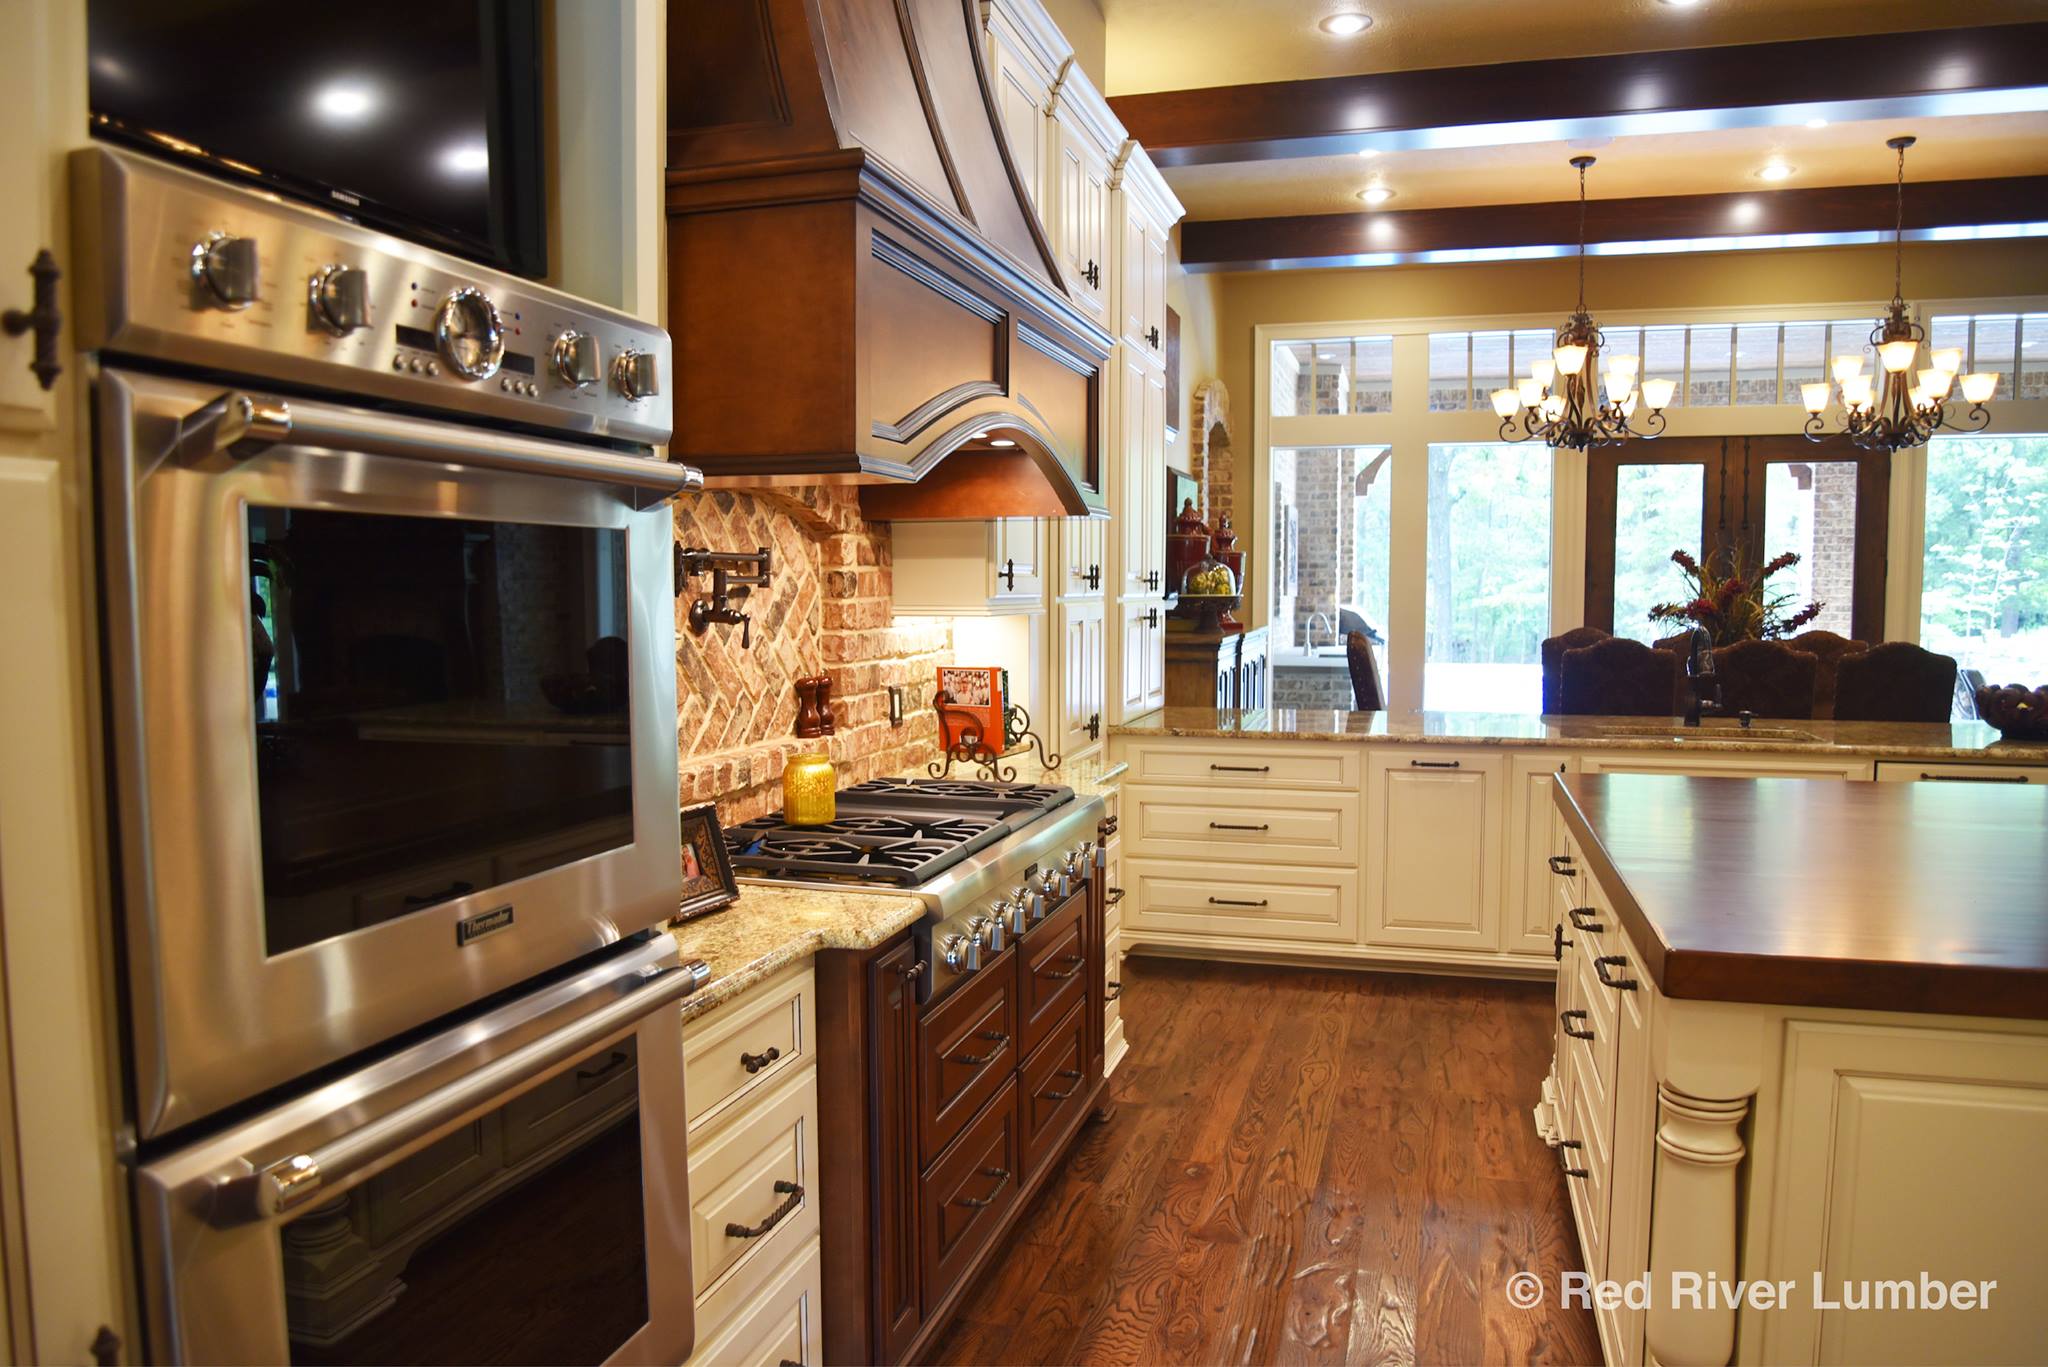  We supplied the  Thermador &nbsp;30-inch Double Oven,&nbsp; Thermador &nbsp;48-Inch Gas Rangetop, and Siena Beige Granite Countertops. 